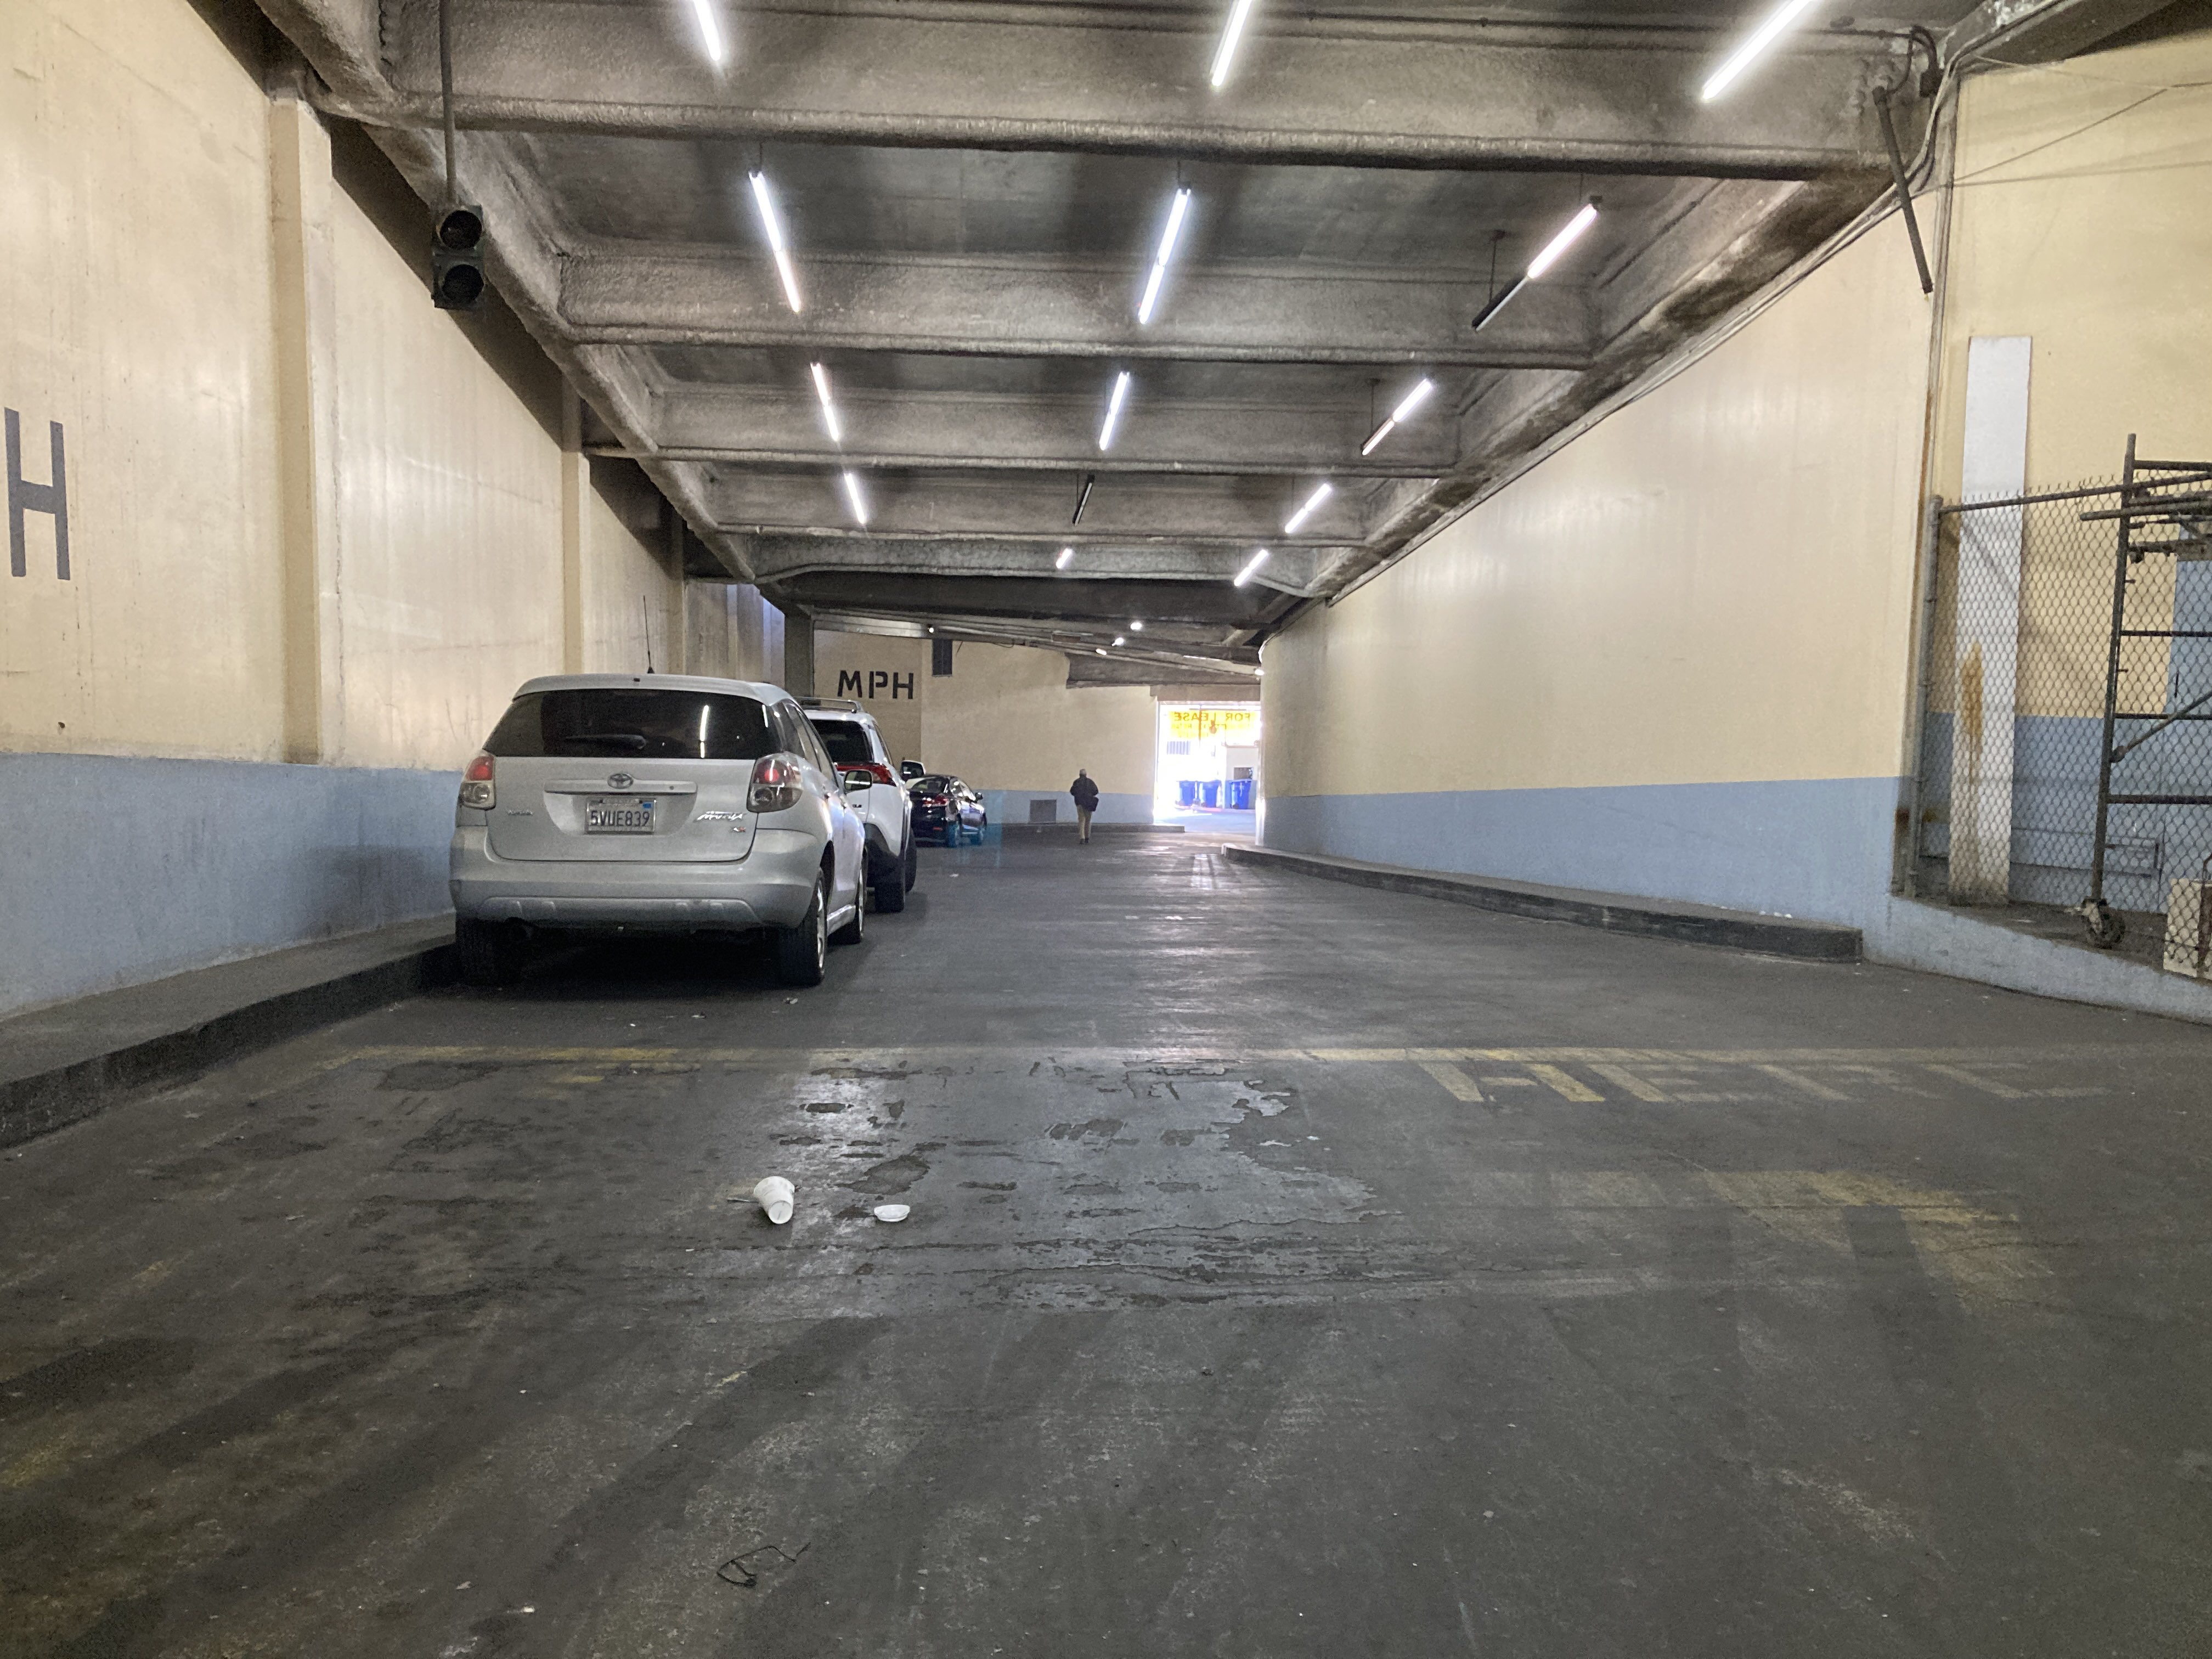 Looking down a large concrete ramp. cars are parked along the beige and powder blue walls, and large painted letters indicate the 5 mile per hour speed limit.